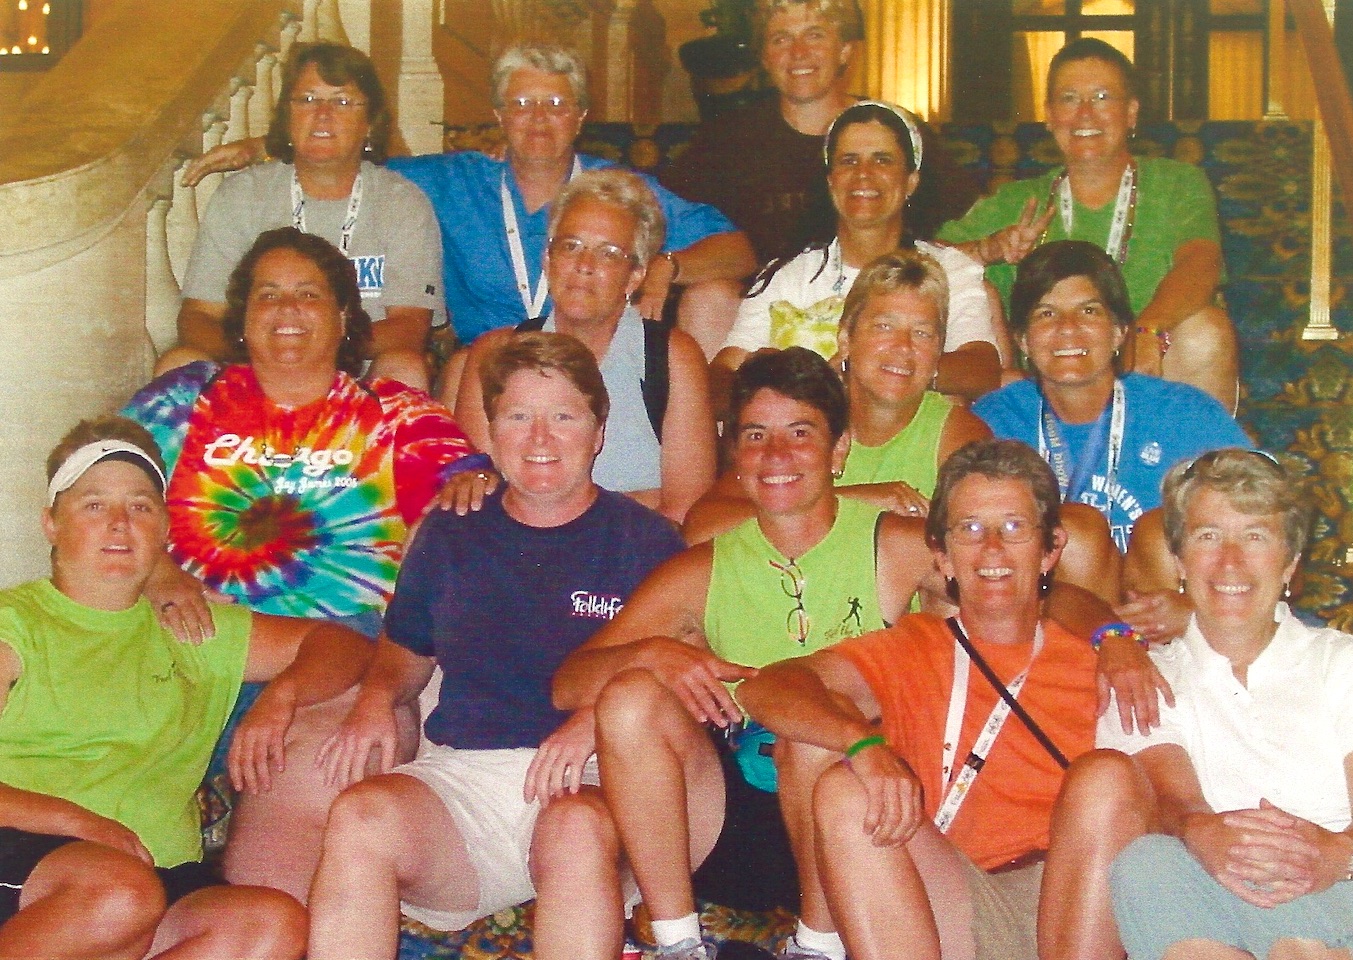 Kim Stacy (placed in the first row in an orange shirt) with her softball team, Custom Designed, at the Gay Games, Chicago, IL 2006.